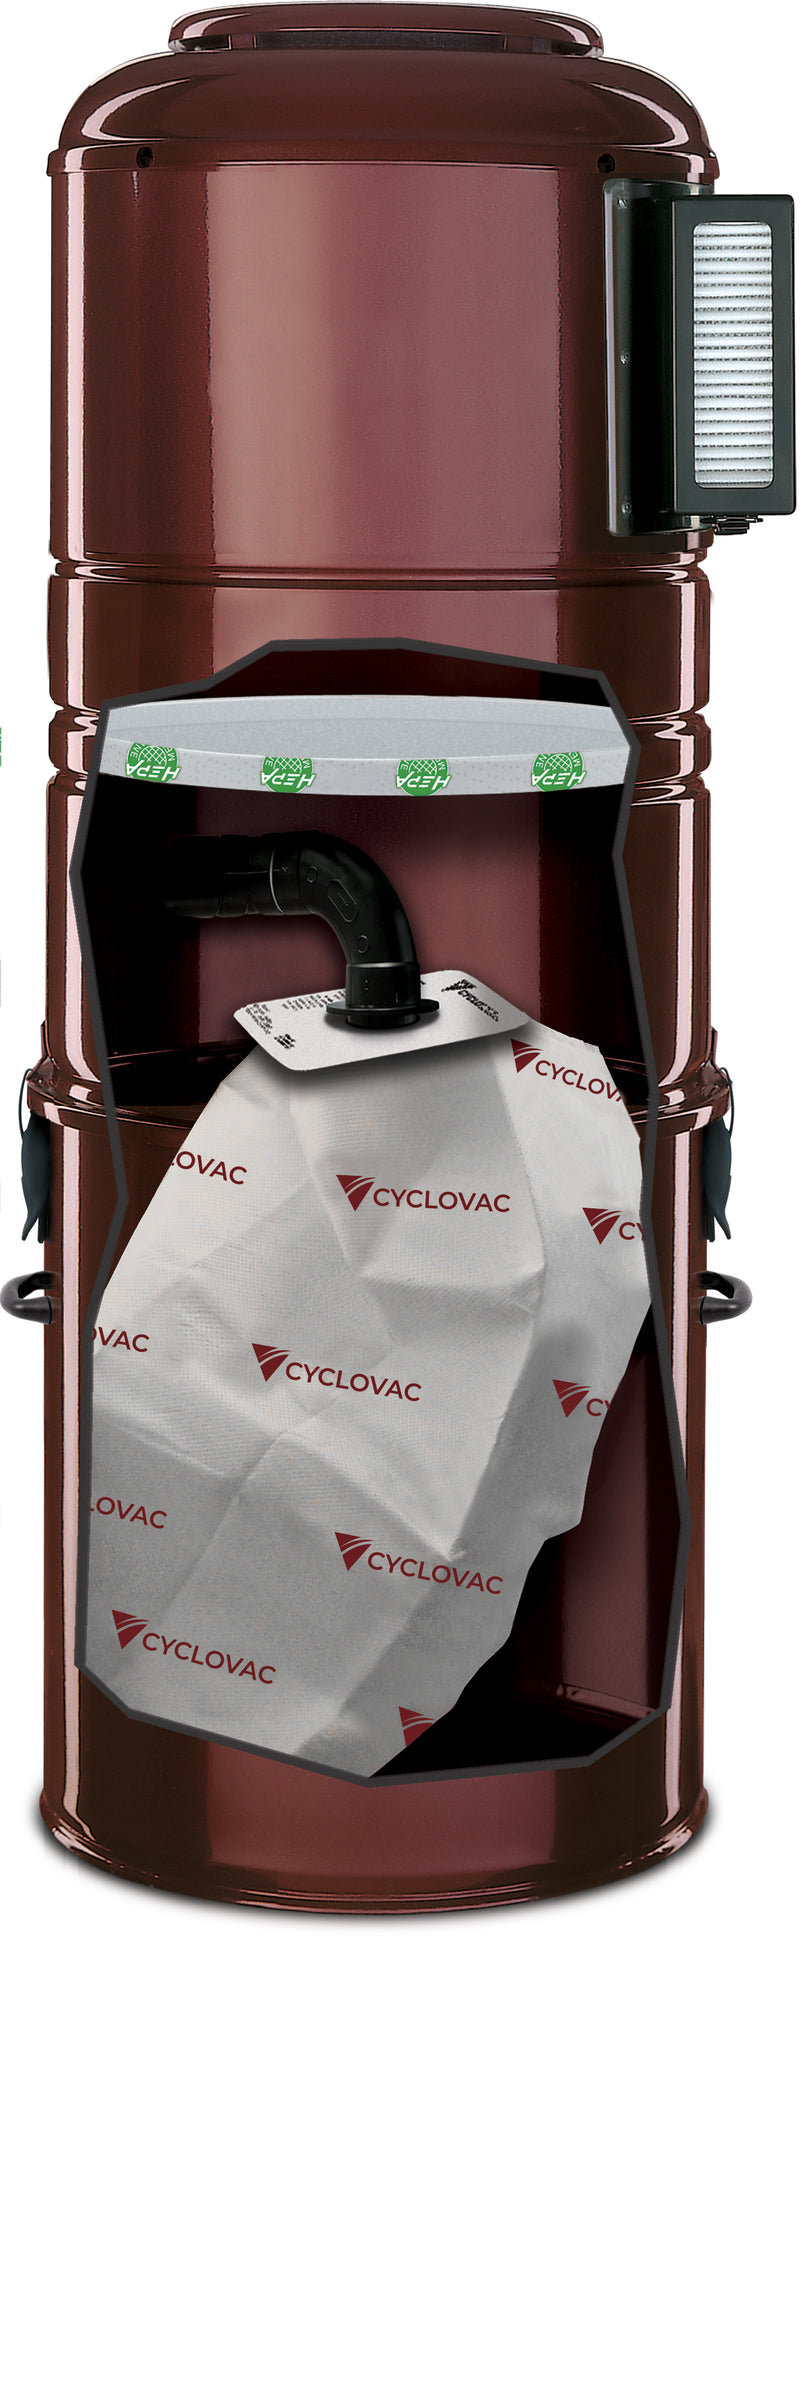 Cyclovac GS125 Canister - With bag - Up to 3500 Sq Ft - Super Vacs Vacuums